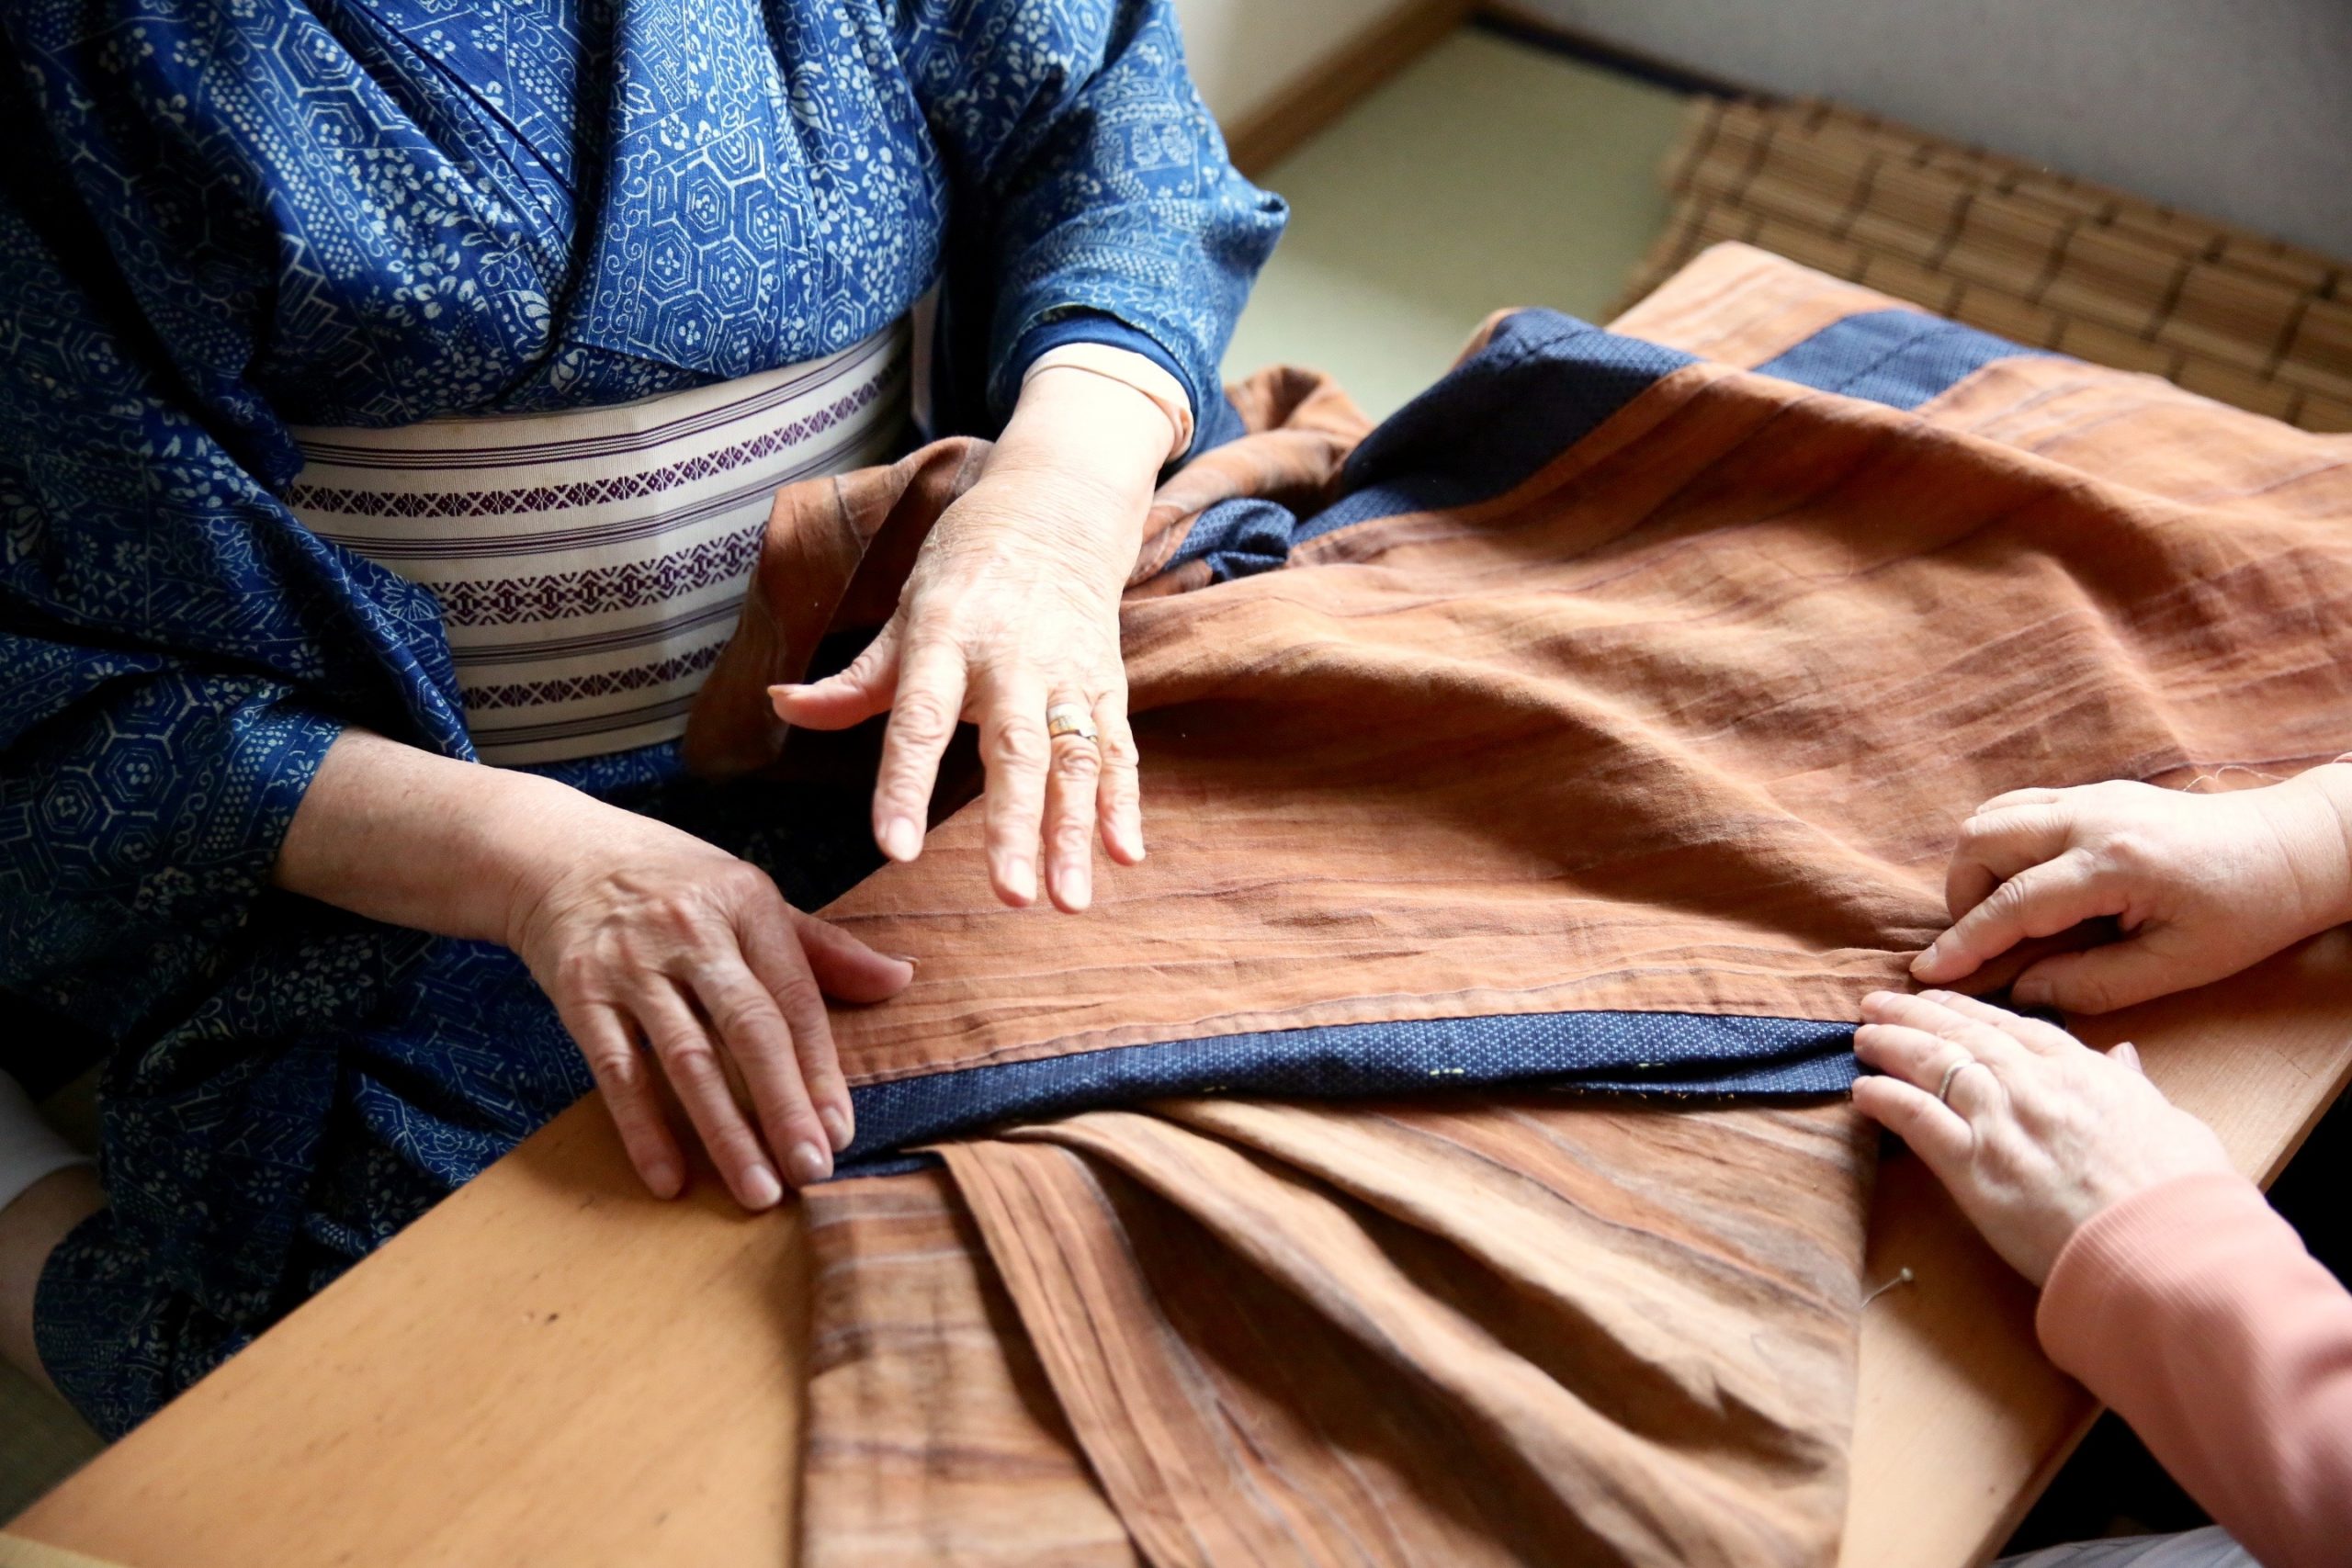 Kimono making in Japan is a dying art